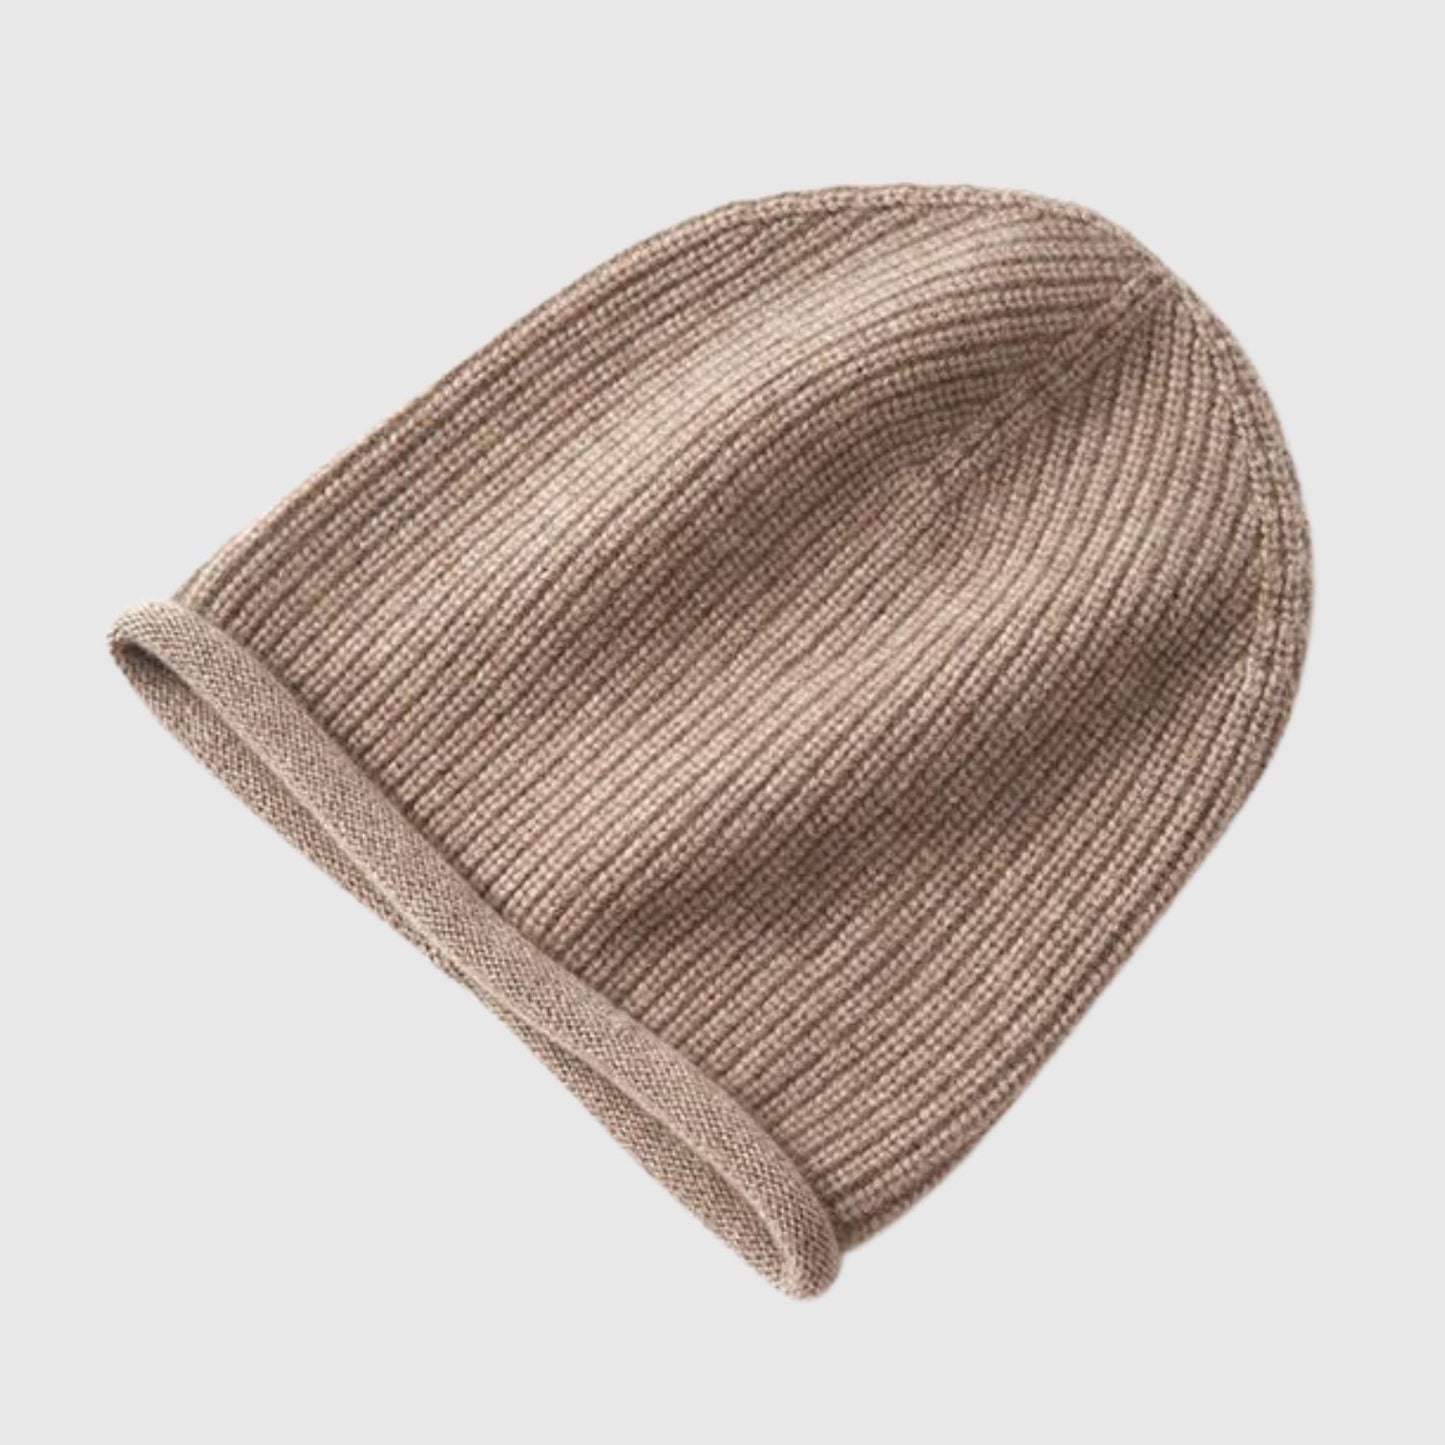 pure cashmere hat with rolled hem from Canada